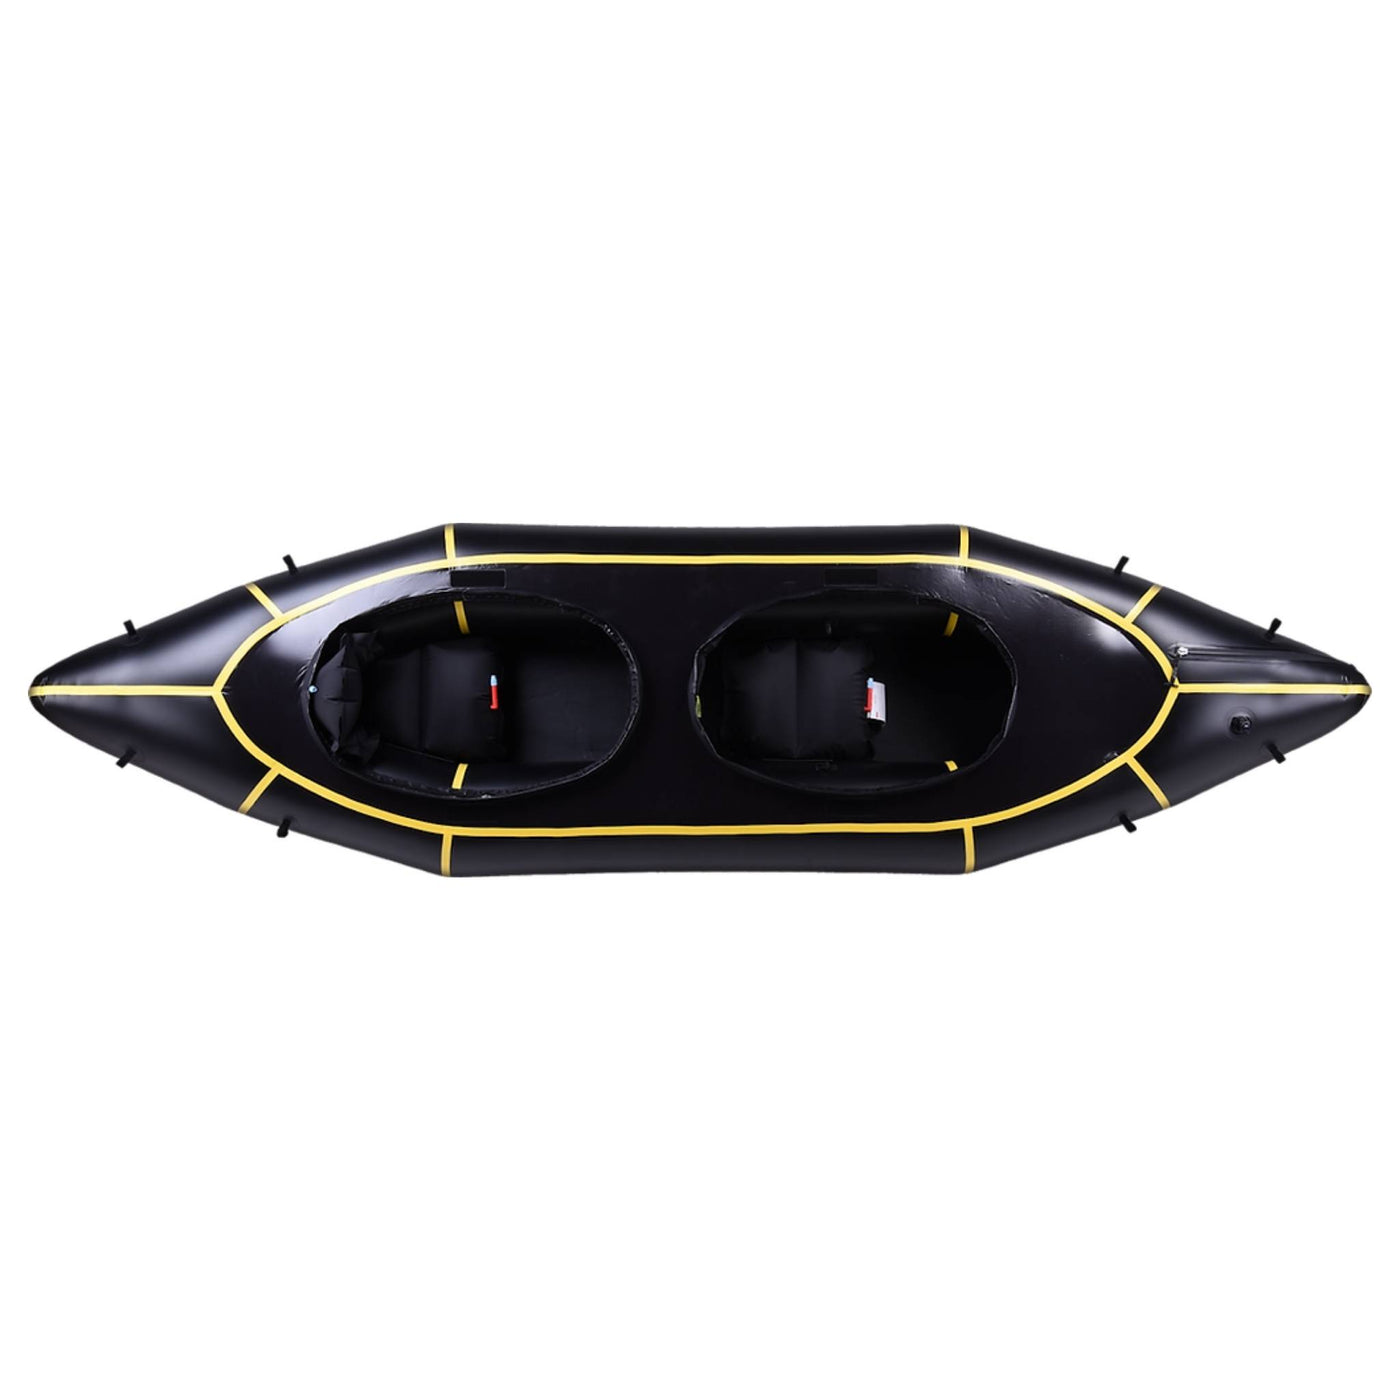 Micro Rafting Systems Barracuda R2 Pro, Whitewater Packrafts | Further Faster Christchurch NZ 